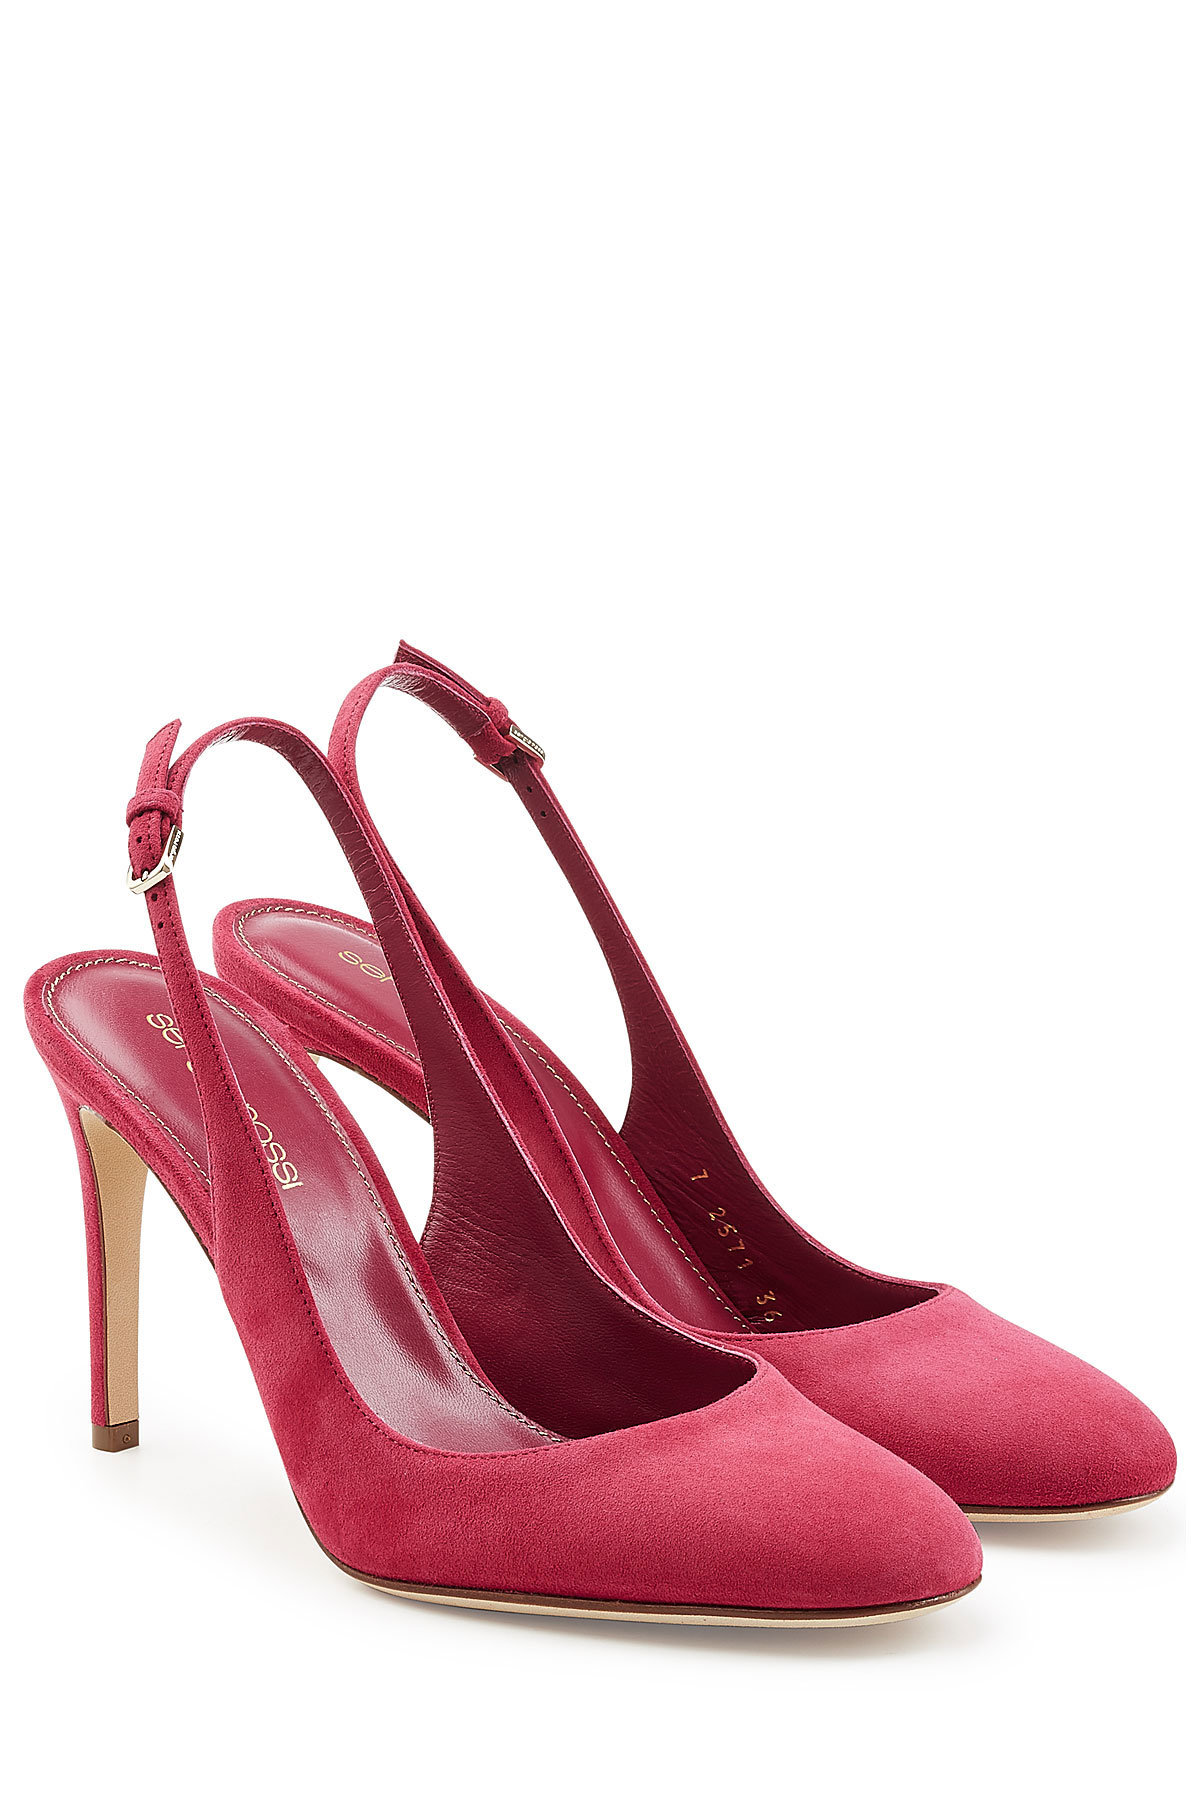 Suede Sling-Back Pumps by Sergio Rossi